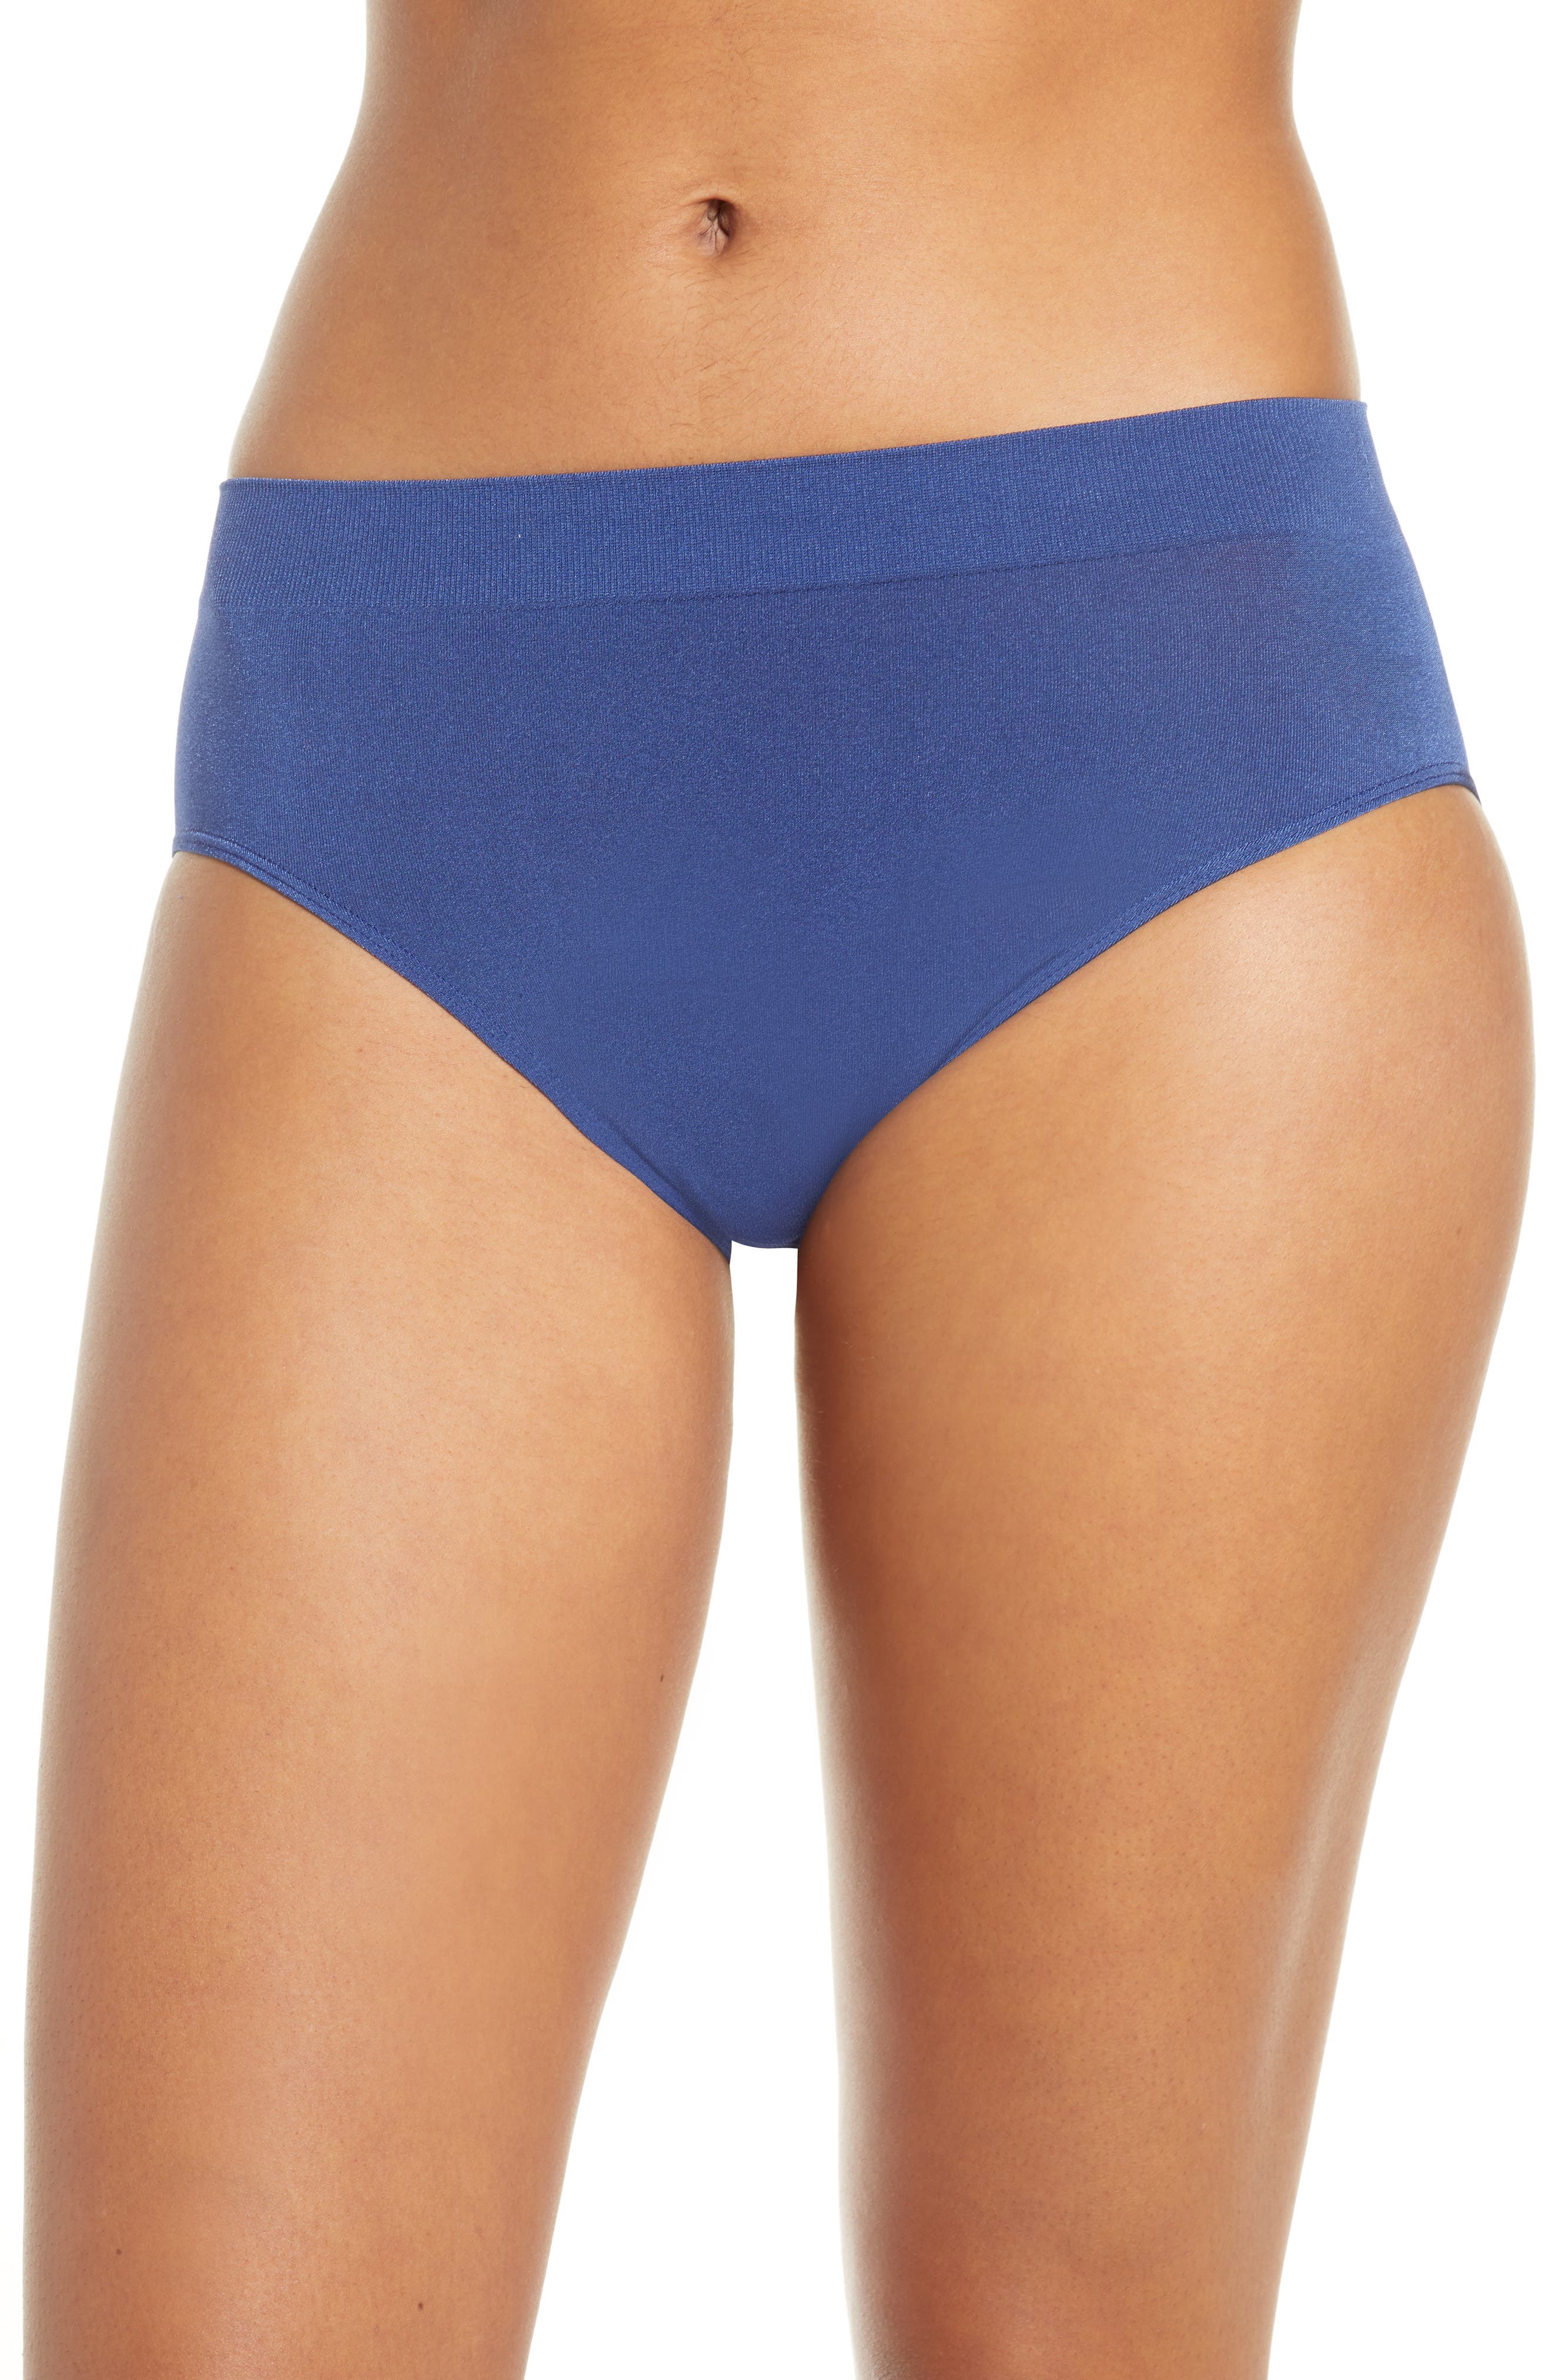 UPC 719544871433 product image for Women's Wacoal B Smooth High Cut Briefs, Size Small - Blue | upcitemdb.com